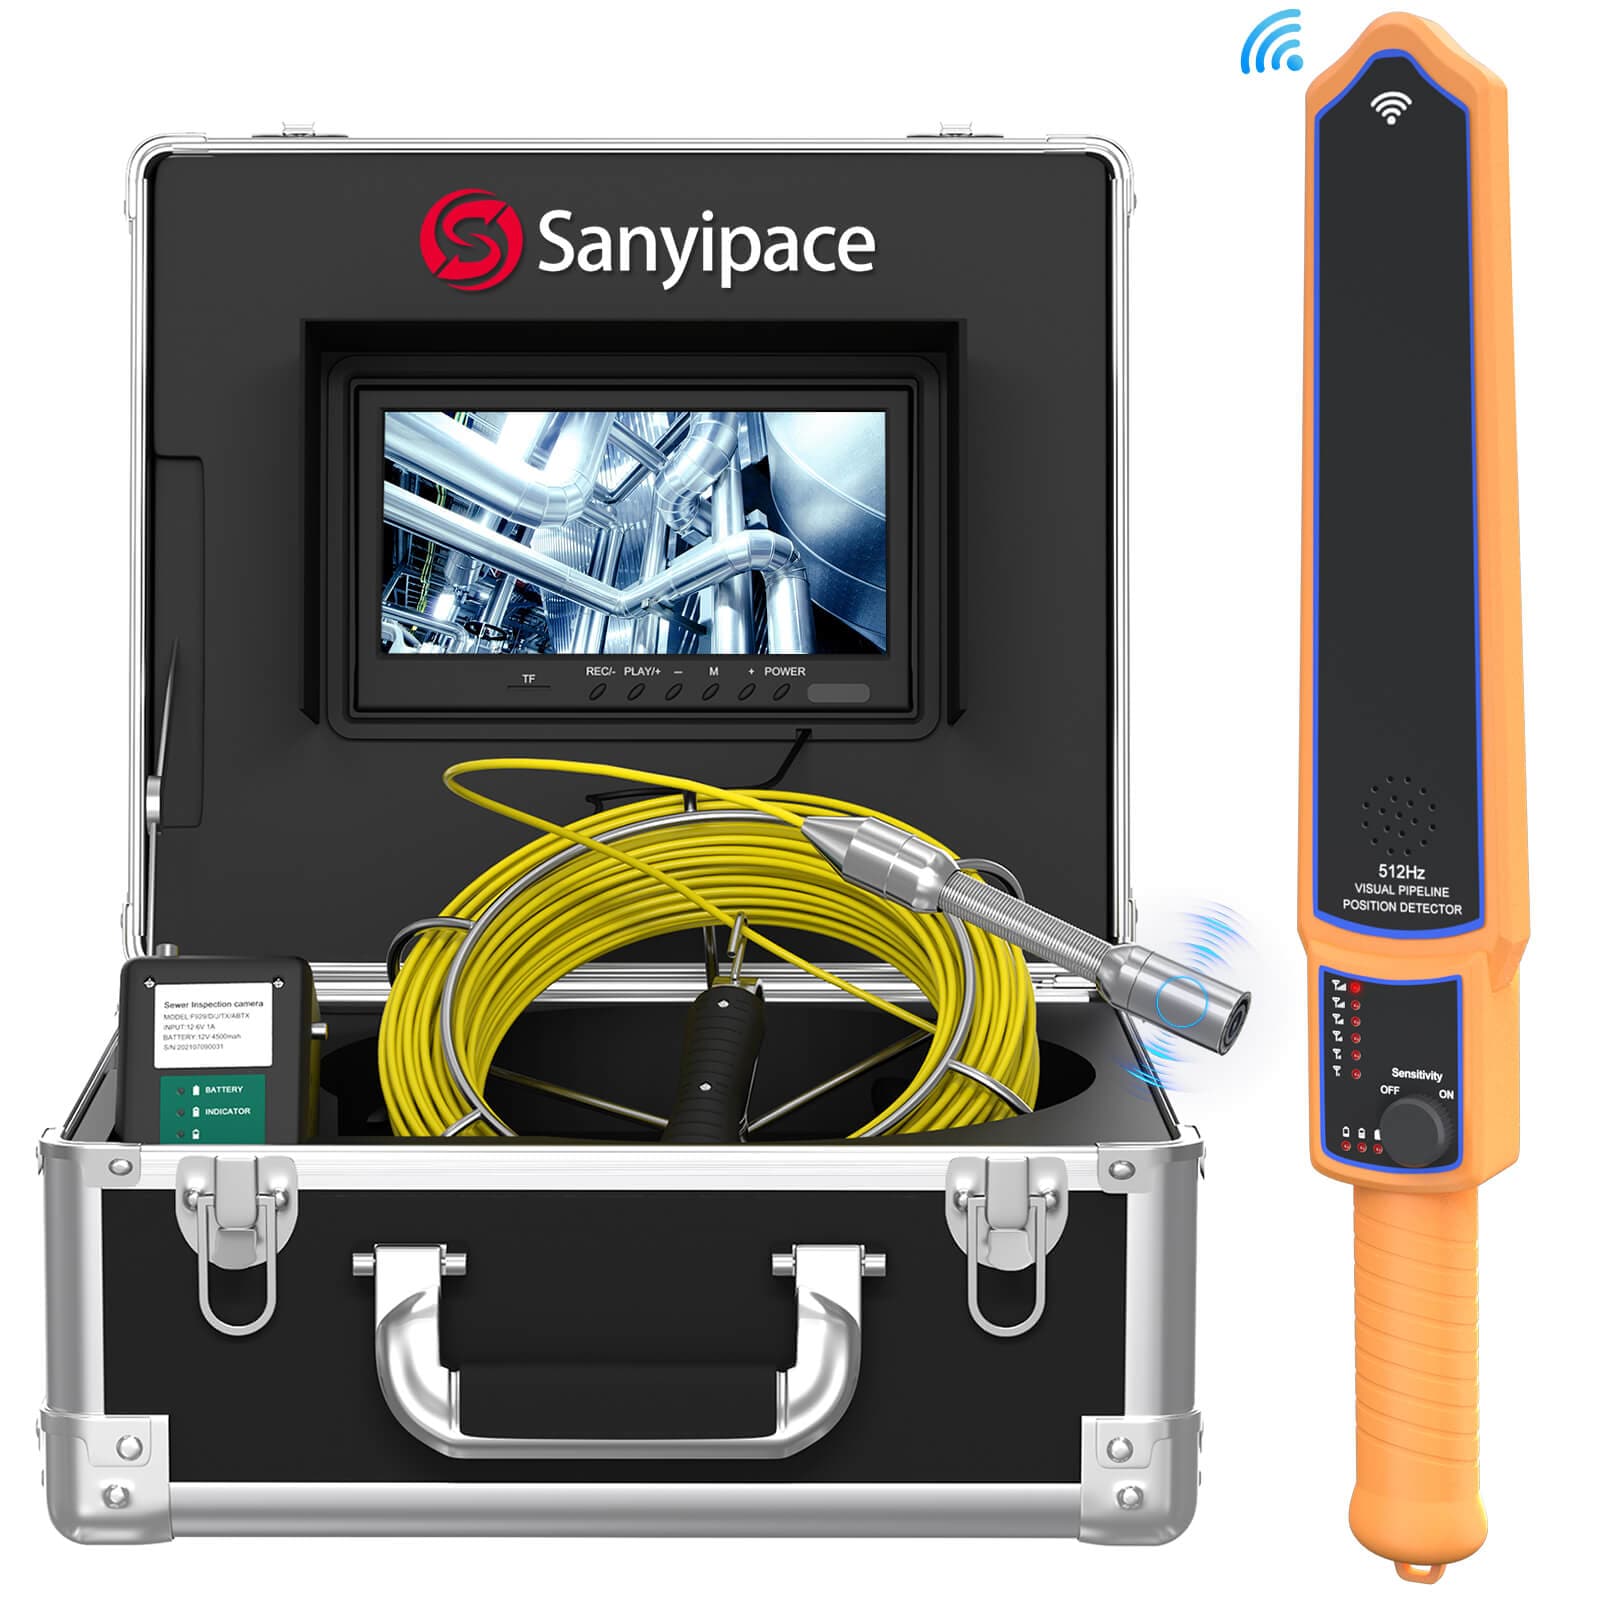 20m HD Pipe Inspection Camera with Self-Leveling and 512Hz Sonde - China  Compact Inspection Camera and Sewer Camera